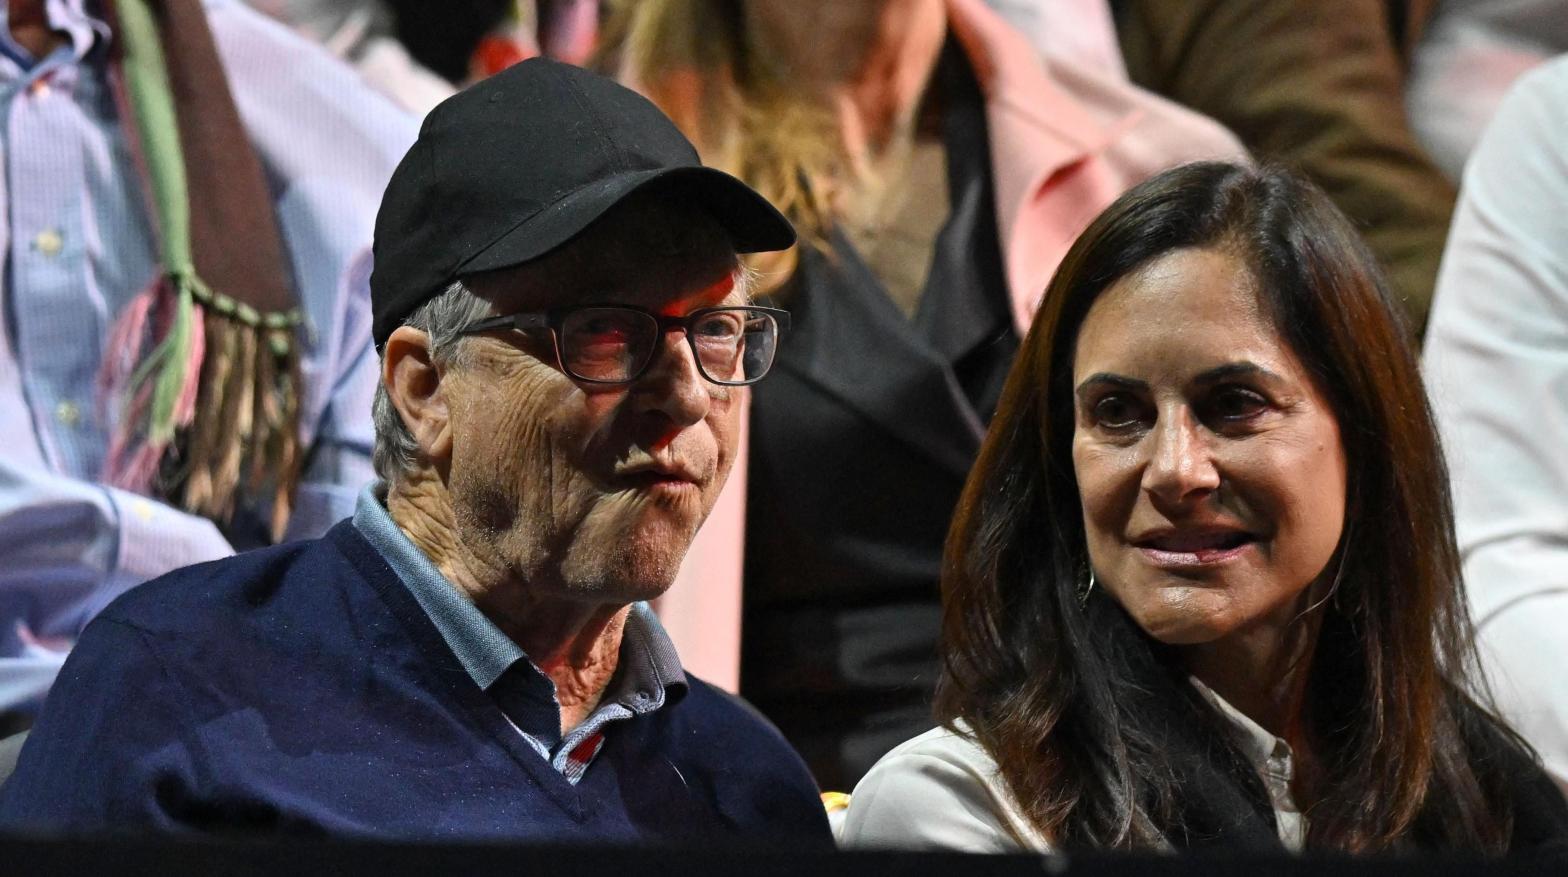 Bill Gates and Melinda French Gates announced they were getting a divorce in 2021, a year after Gates left the Microsoft board after being hounded by allegations he harassed a female employee while as CEO. (Photo: GLYN KIRK/AFP, Getty Images)